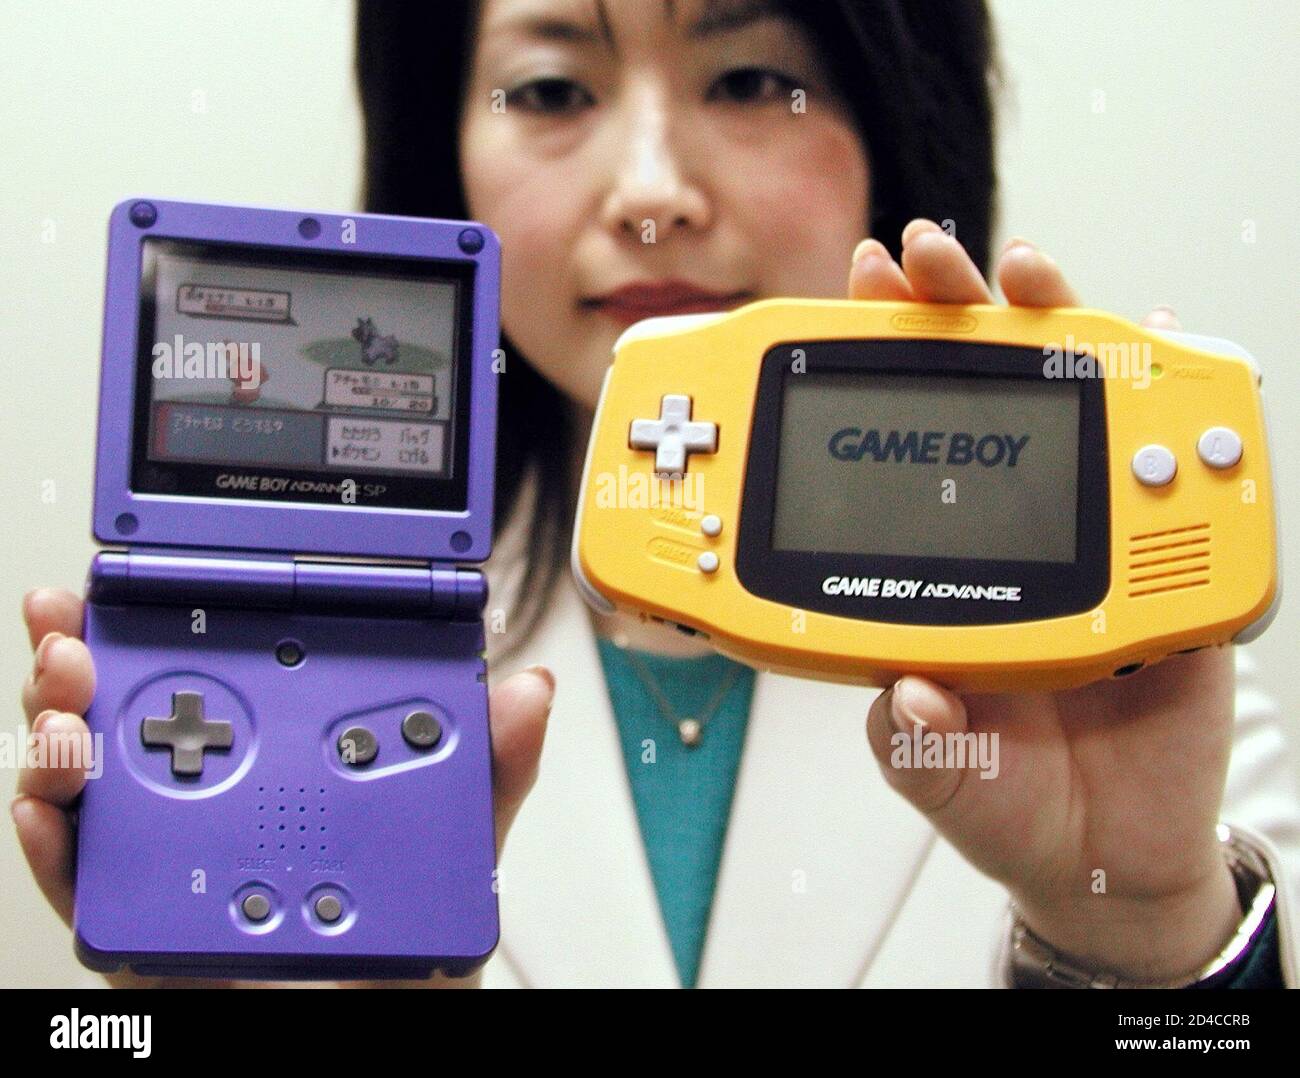 A Nintendo Co Employee Displays The Company S New Game Boy Advance Sp L And The Current Version In Osaka Western Japan On January 7 03 Japan S Videogame Giant Said On Tuesday That